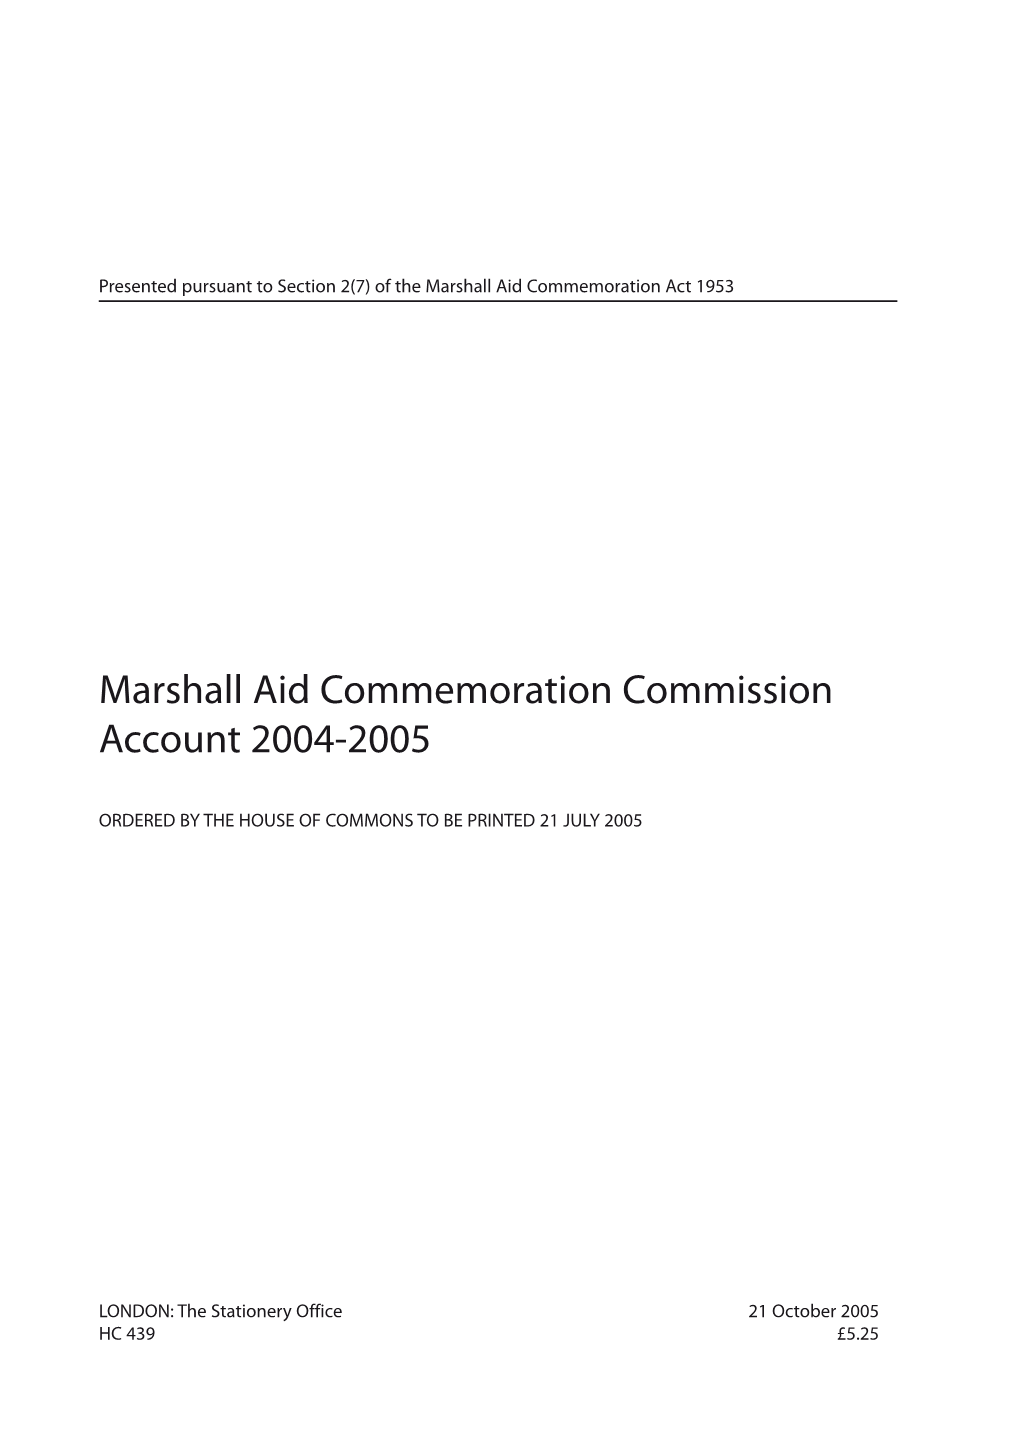 Marshall Aid Commemoration Commission Account 2004-2005